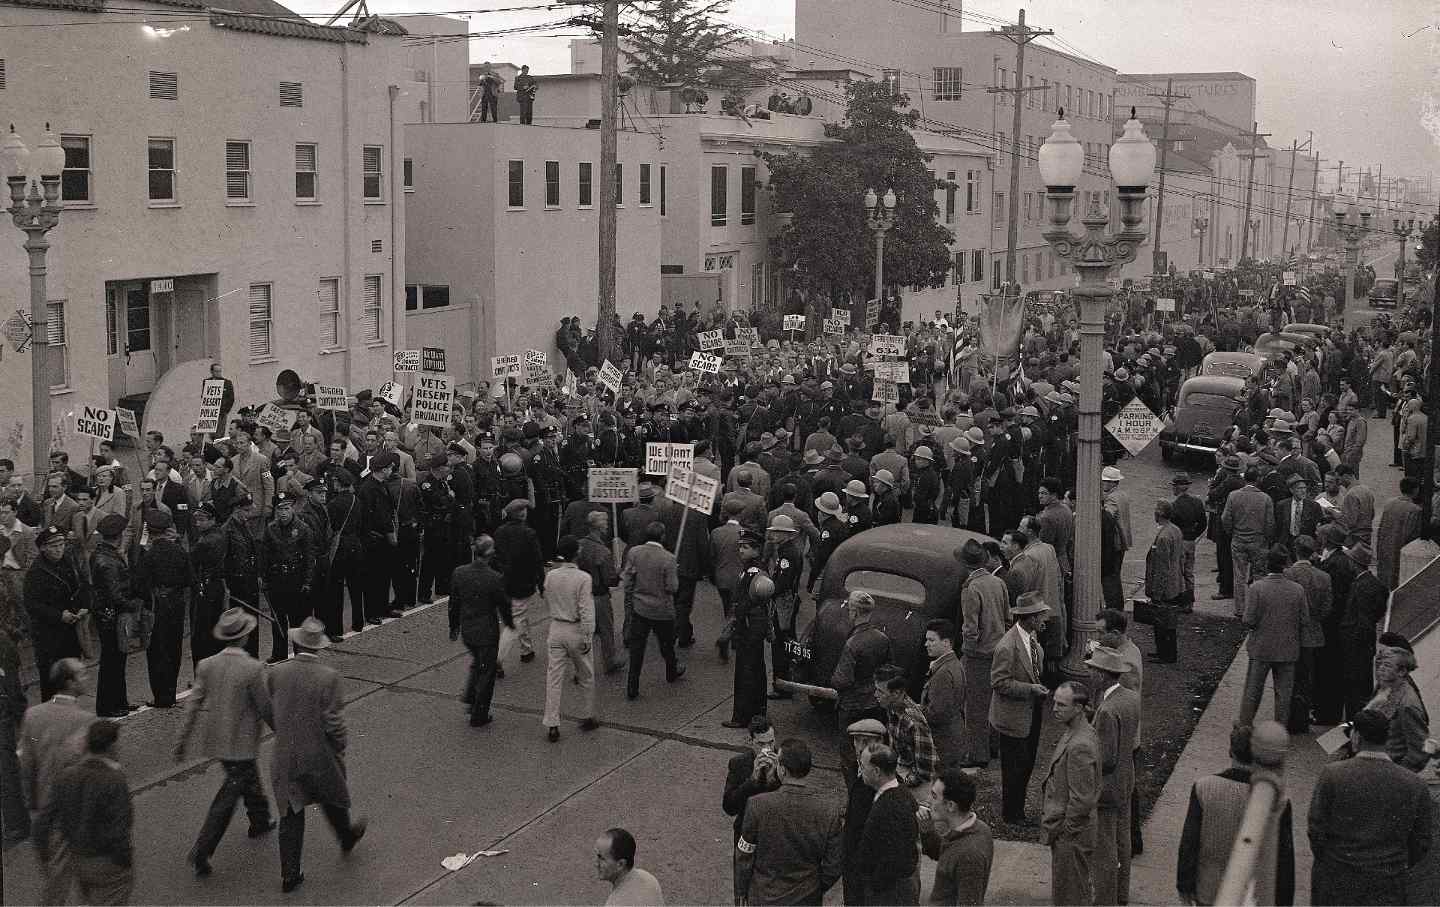 Pickets march between rows of watchful police during the biggest demonstration yet staged by the Conference of Studio Unions, at Columbia Studios, on October 26, 1946.